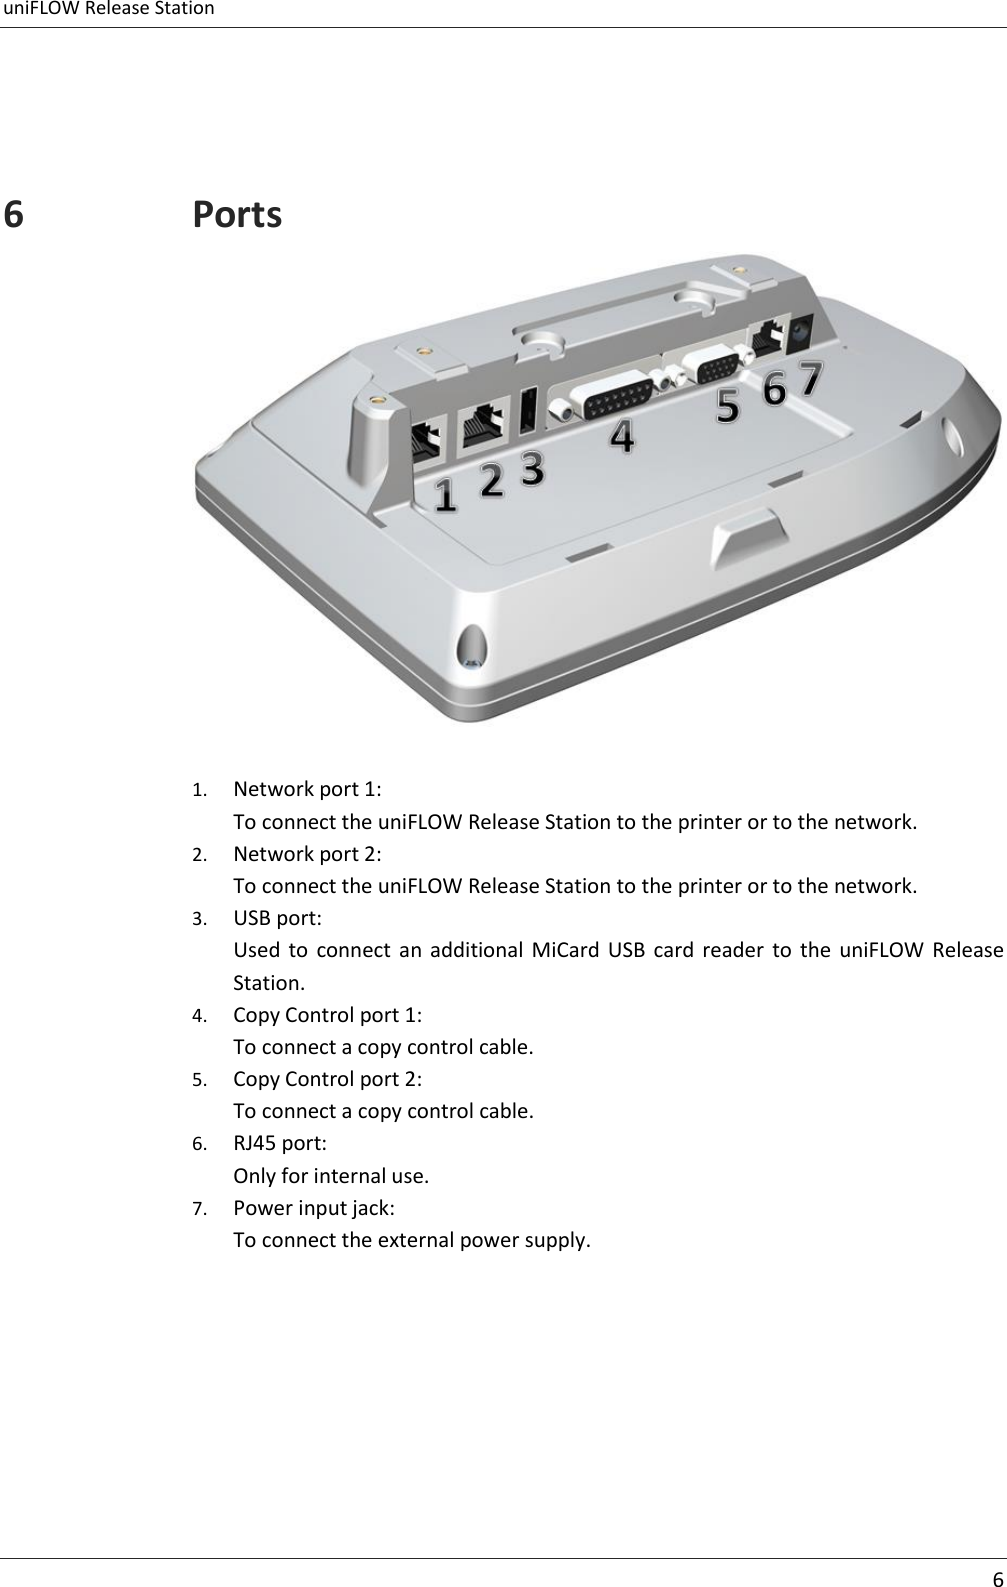 uniFLOW Release Station      6    6 Ports   1. Network port 1: To connect the uniFLOW Release Station to the printer or to the network. 2. Network port 2: To connect the uniFLOW Release Station to the printer or to the network. 3. USB port: Used  to  connect  an  additional MiCard  USB  card  reader  to  the  uniFLOW Release Station. 4. Copy Control port 1: To connect a copy control cable. 5. Copy Control port 2: To connect a copy control cable. 6. RJ45 port: Only for internal use. 7. Power input jack: To connect the external power supply. 